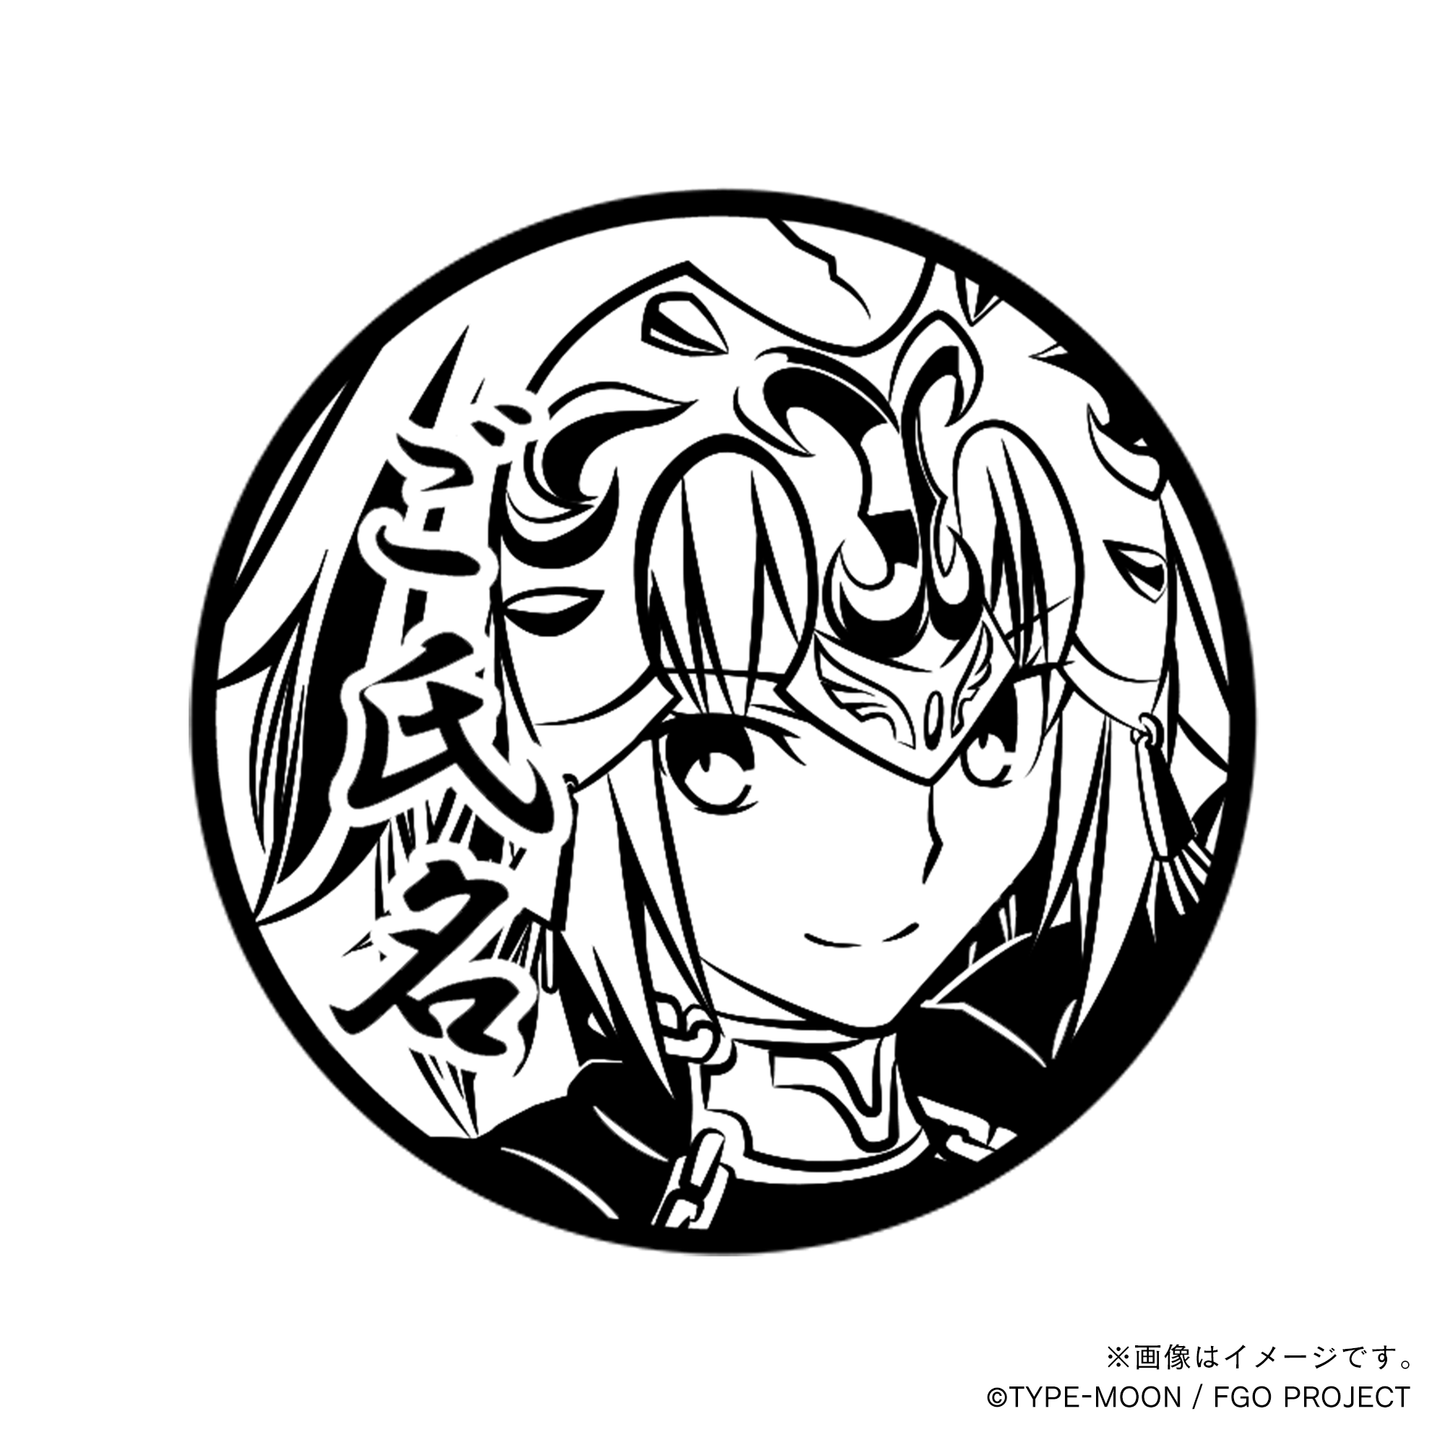 【Fate Grand Order】ジャンヌ・ダルク・丸印18mm_rul